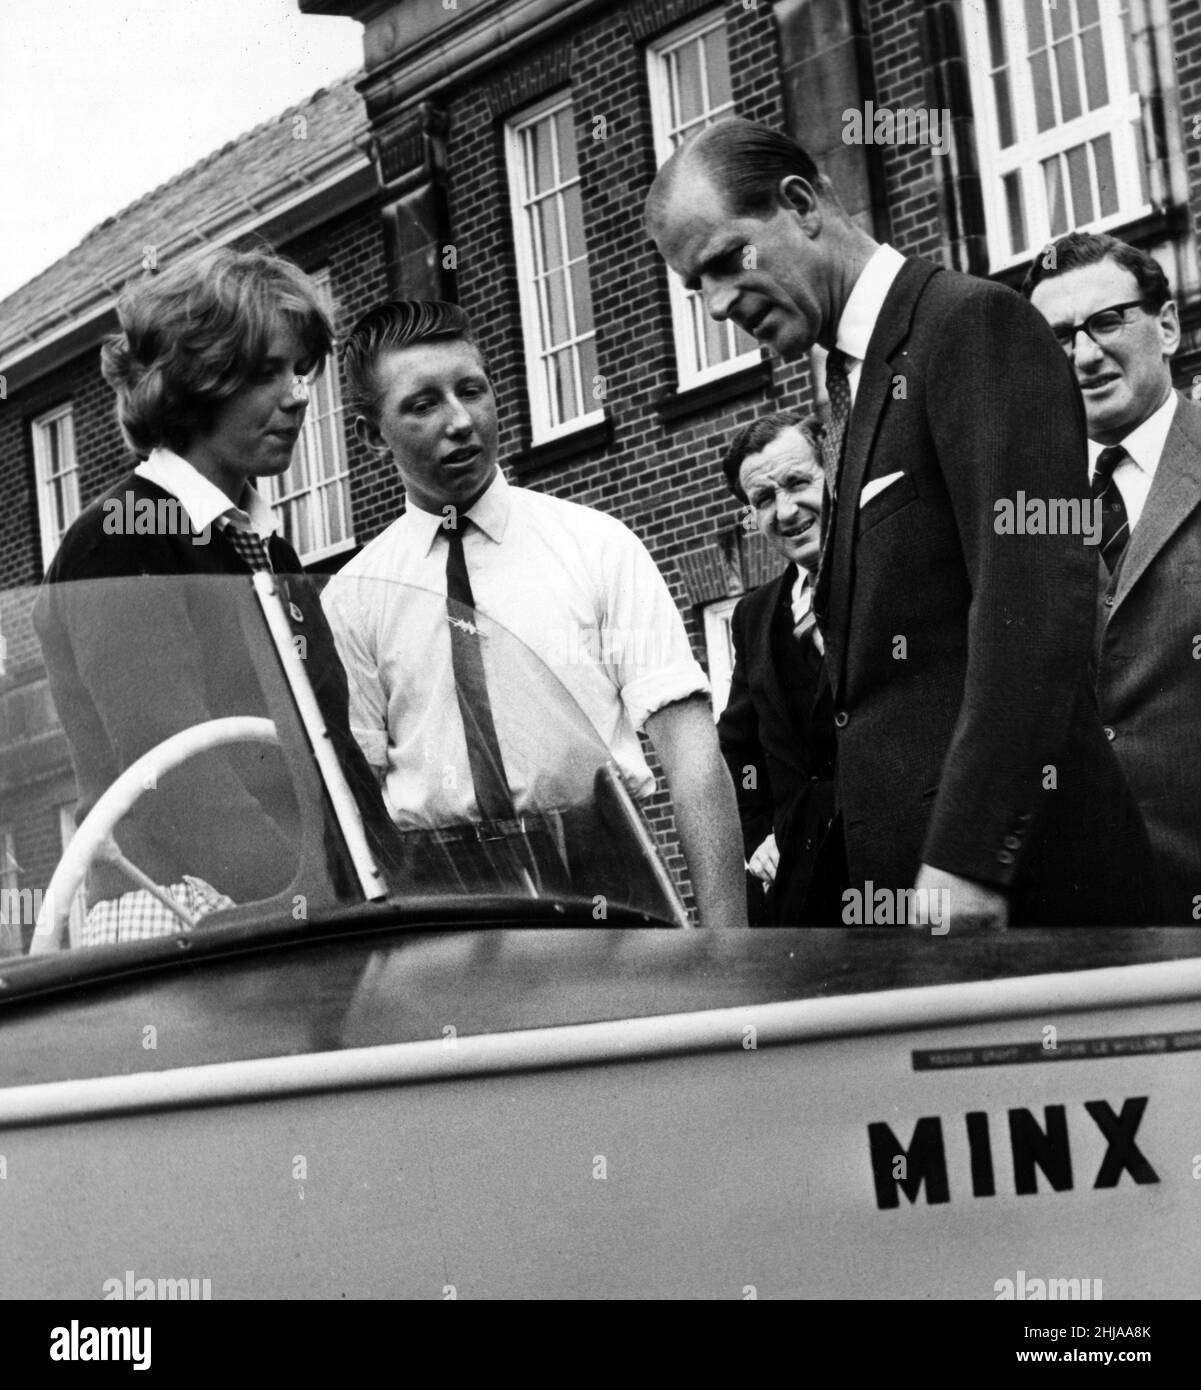 Sandra Leamer, 15, and Jim Brown, 14, both from Newton-le-Willows, show off their speedboat 'Minx' to Prince Philip, Duke of Edinburgh, which was built by pupils of Newton-le-Willows County Secondary School. 14th June 1963. Stock Photo